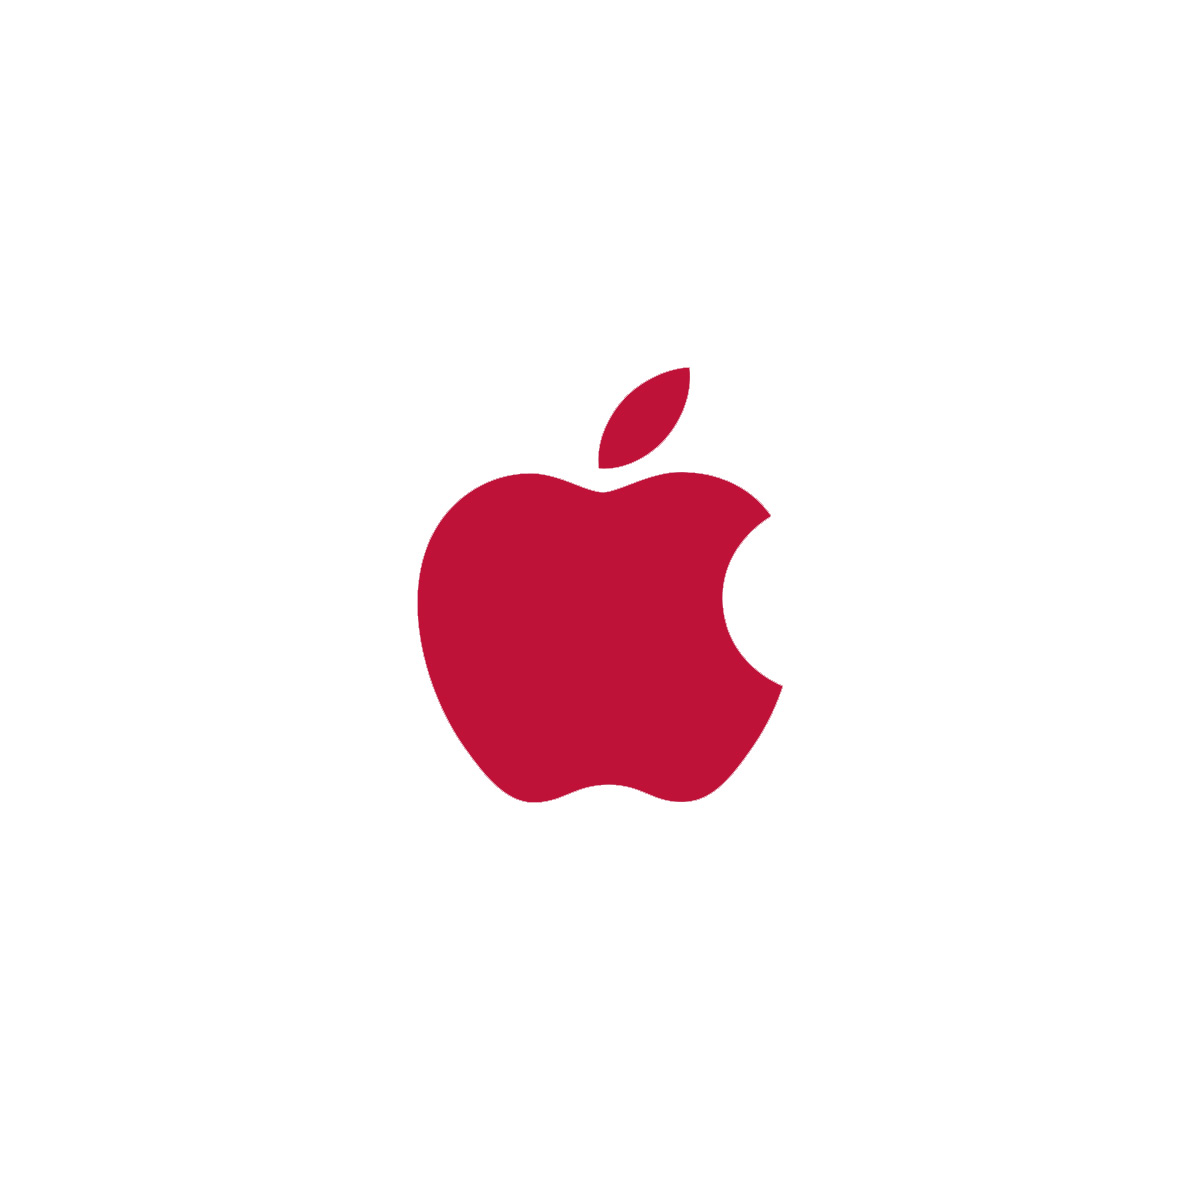 Red Apple Wallpaper Hd For Mobile